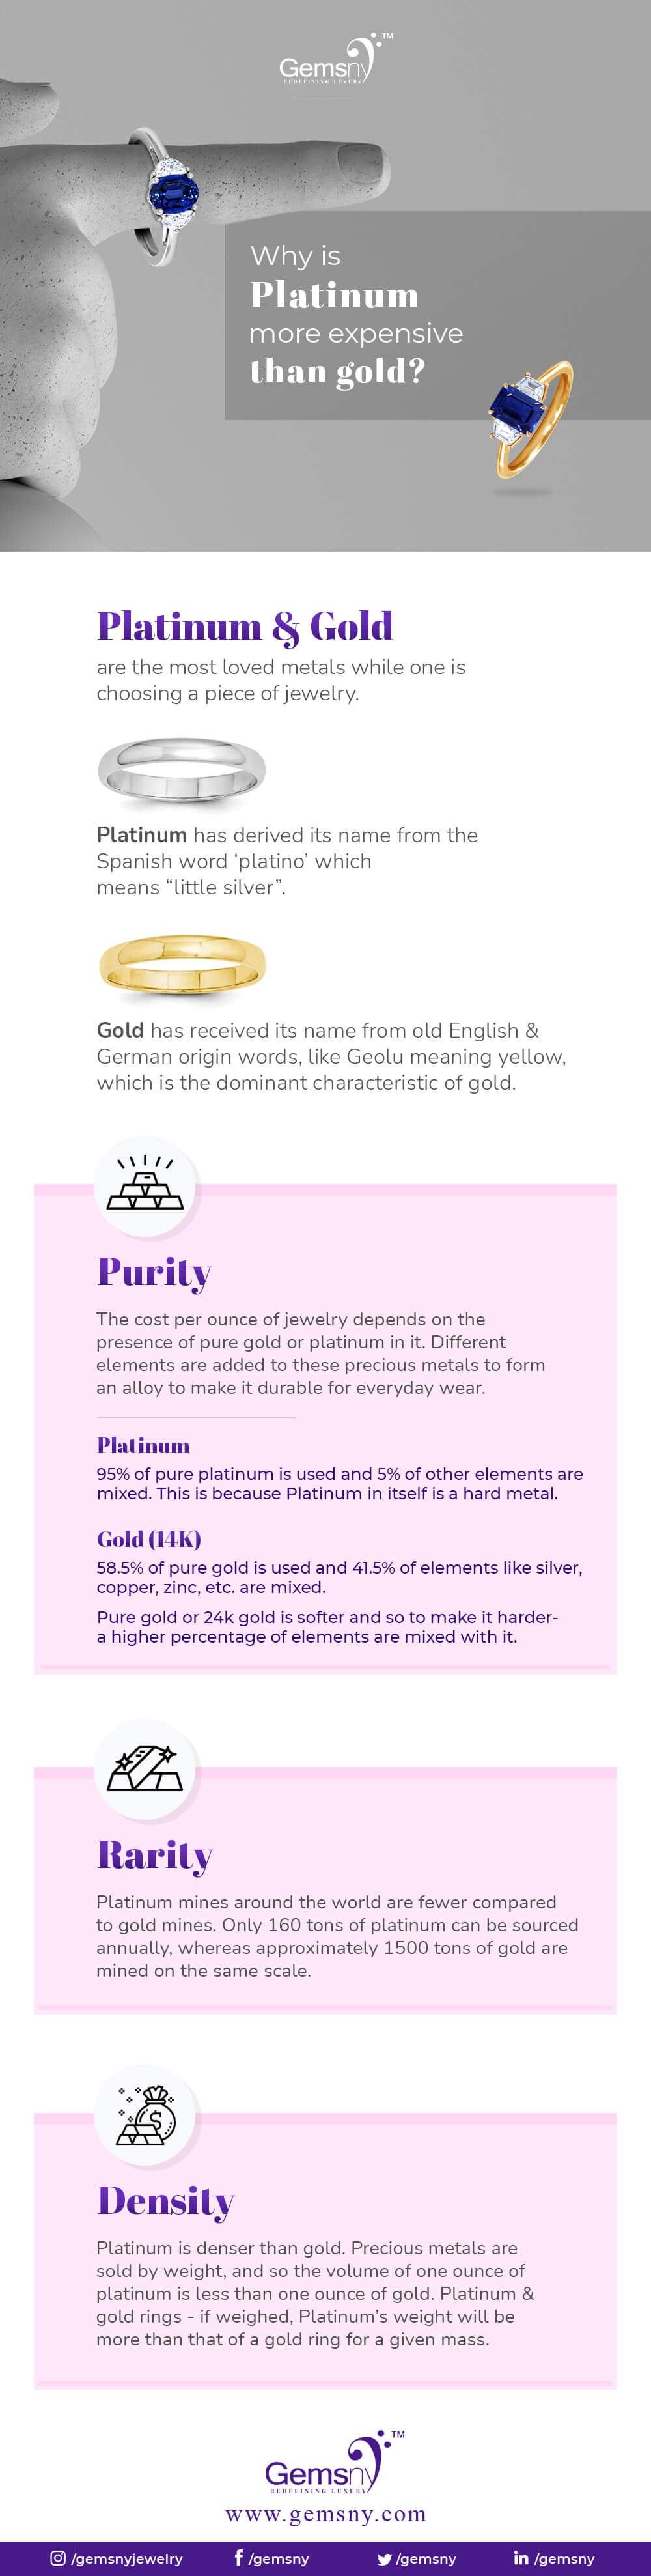 Why Platinum Jewelry is more expensive than Gold